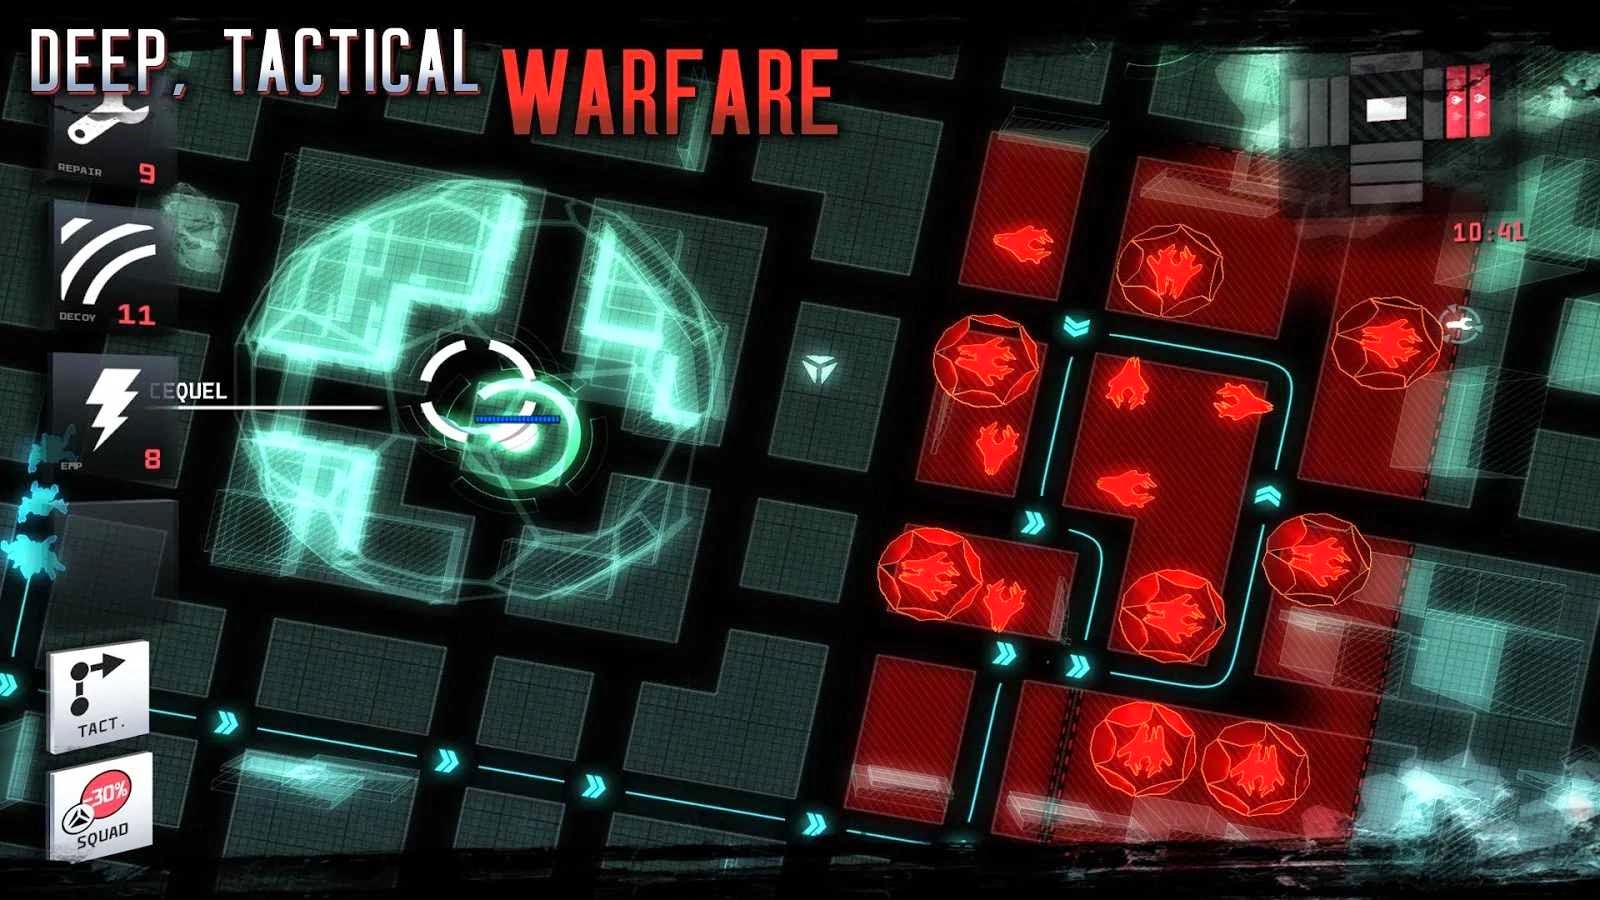 download anomaly 2 apk + data